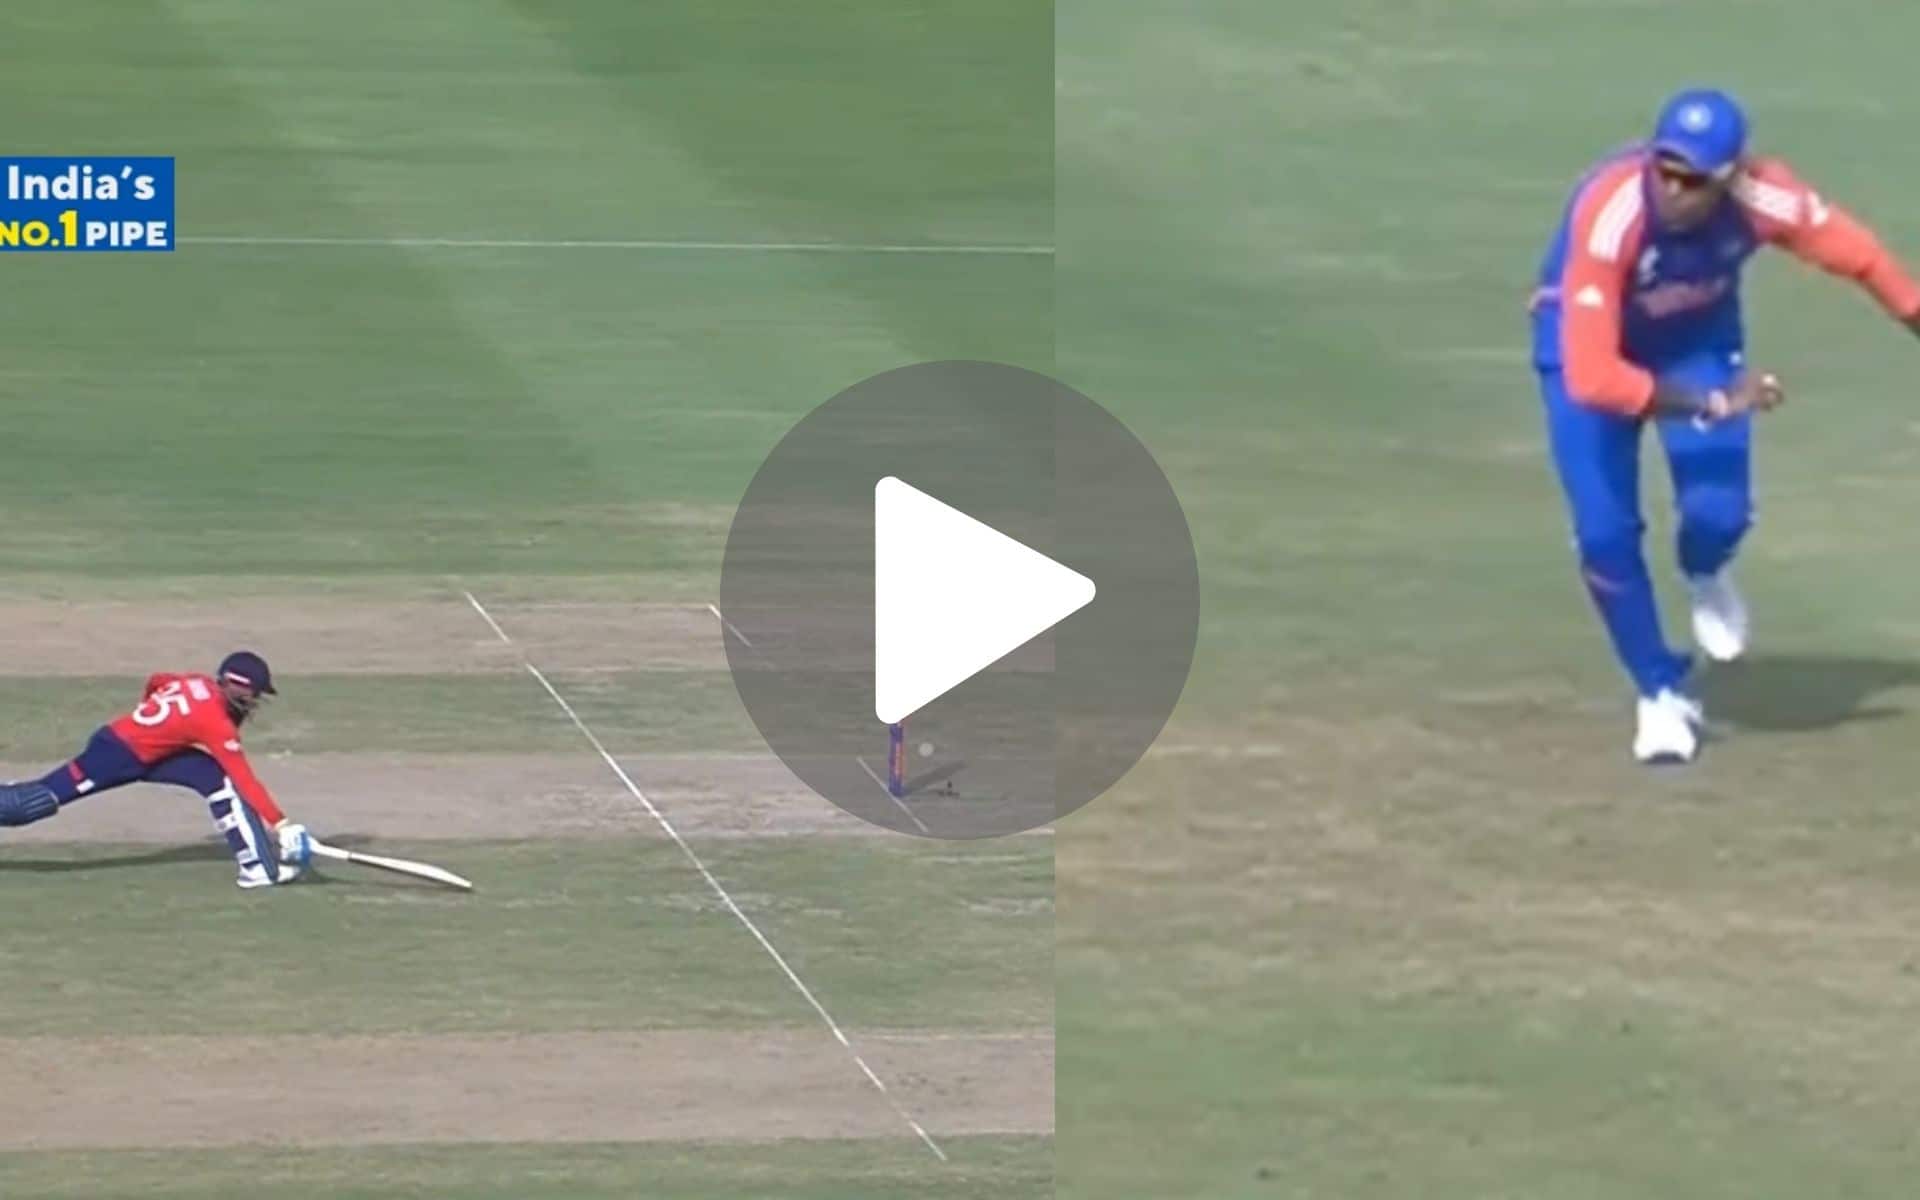 [Watch] SKY Turns Into Jonty Rhodes; Pulls Off A 'Cheetah' Run Out To Send England In Tatters